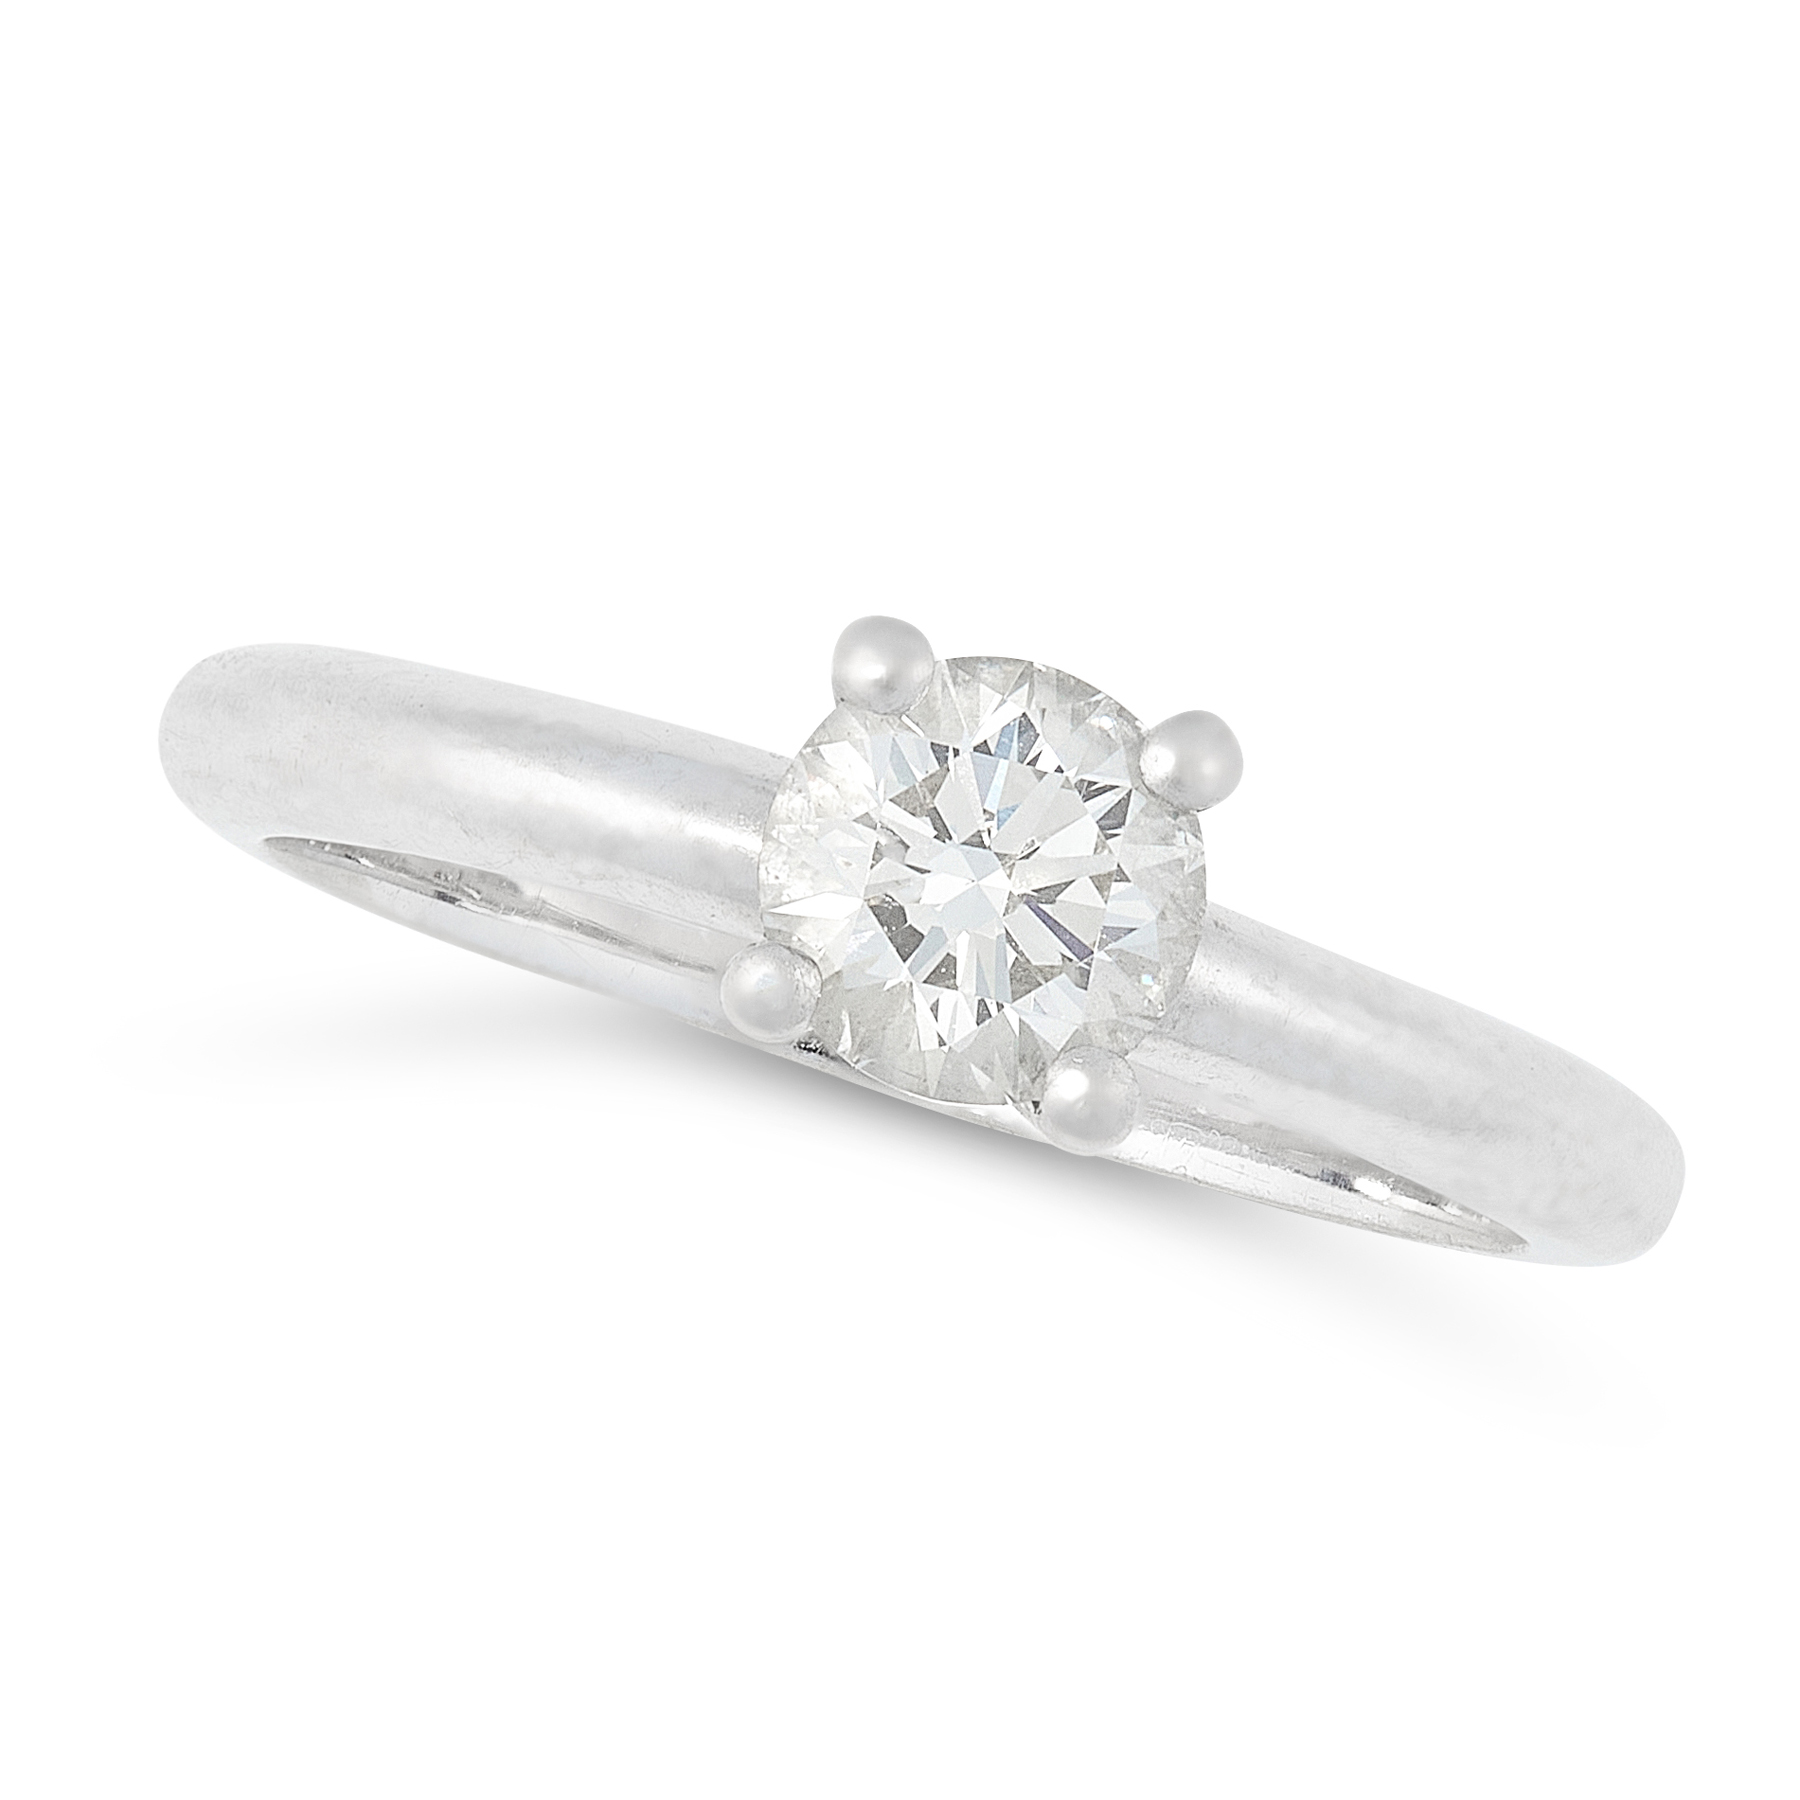 A DIAMOND SOLITAIRE RING in platinum, set with a round cut diamond of 0.53 carats, full British